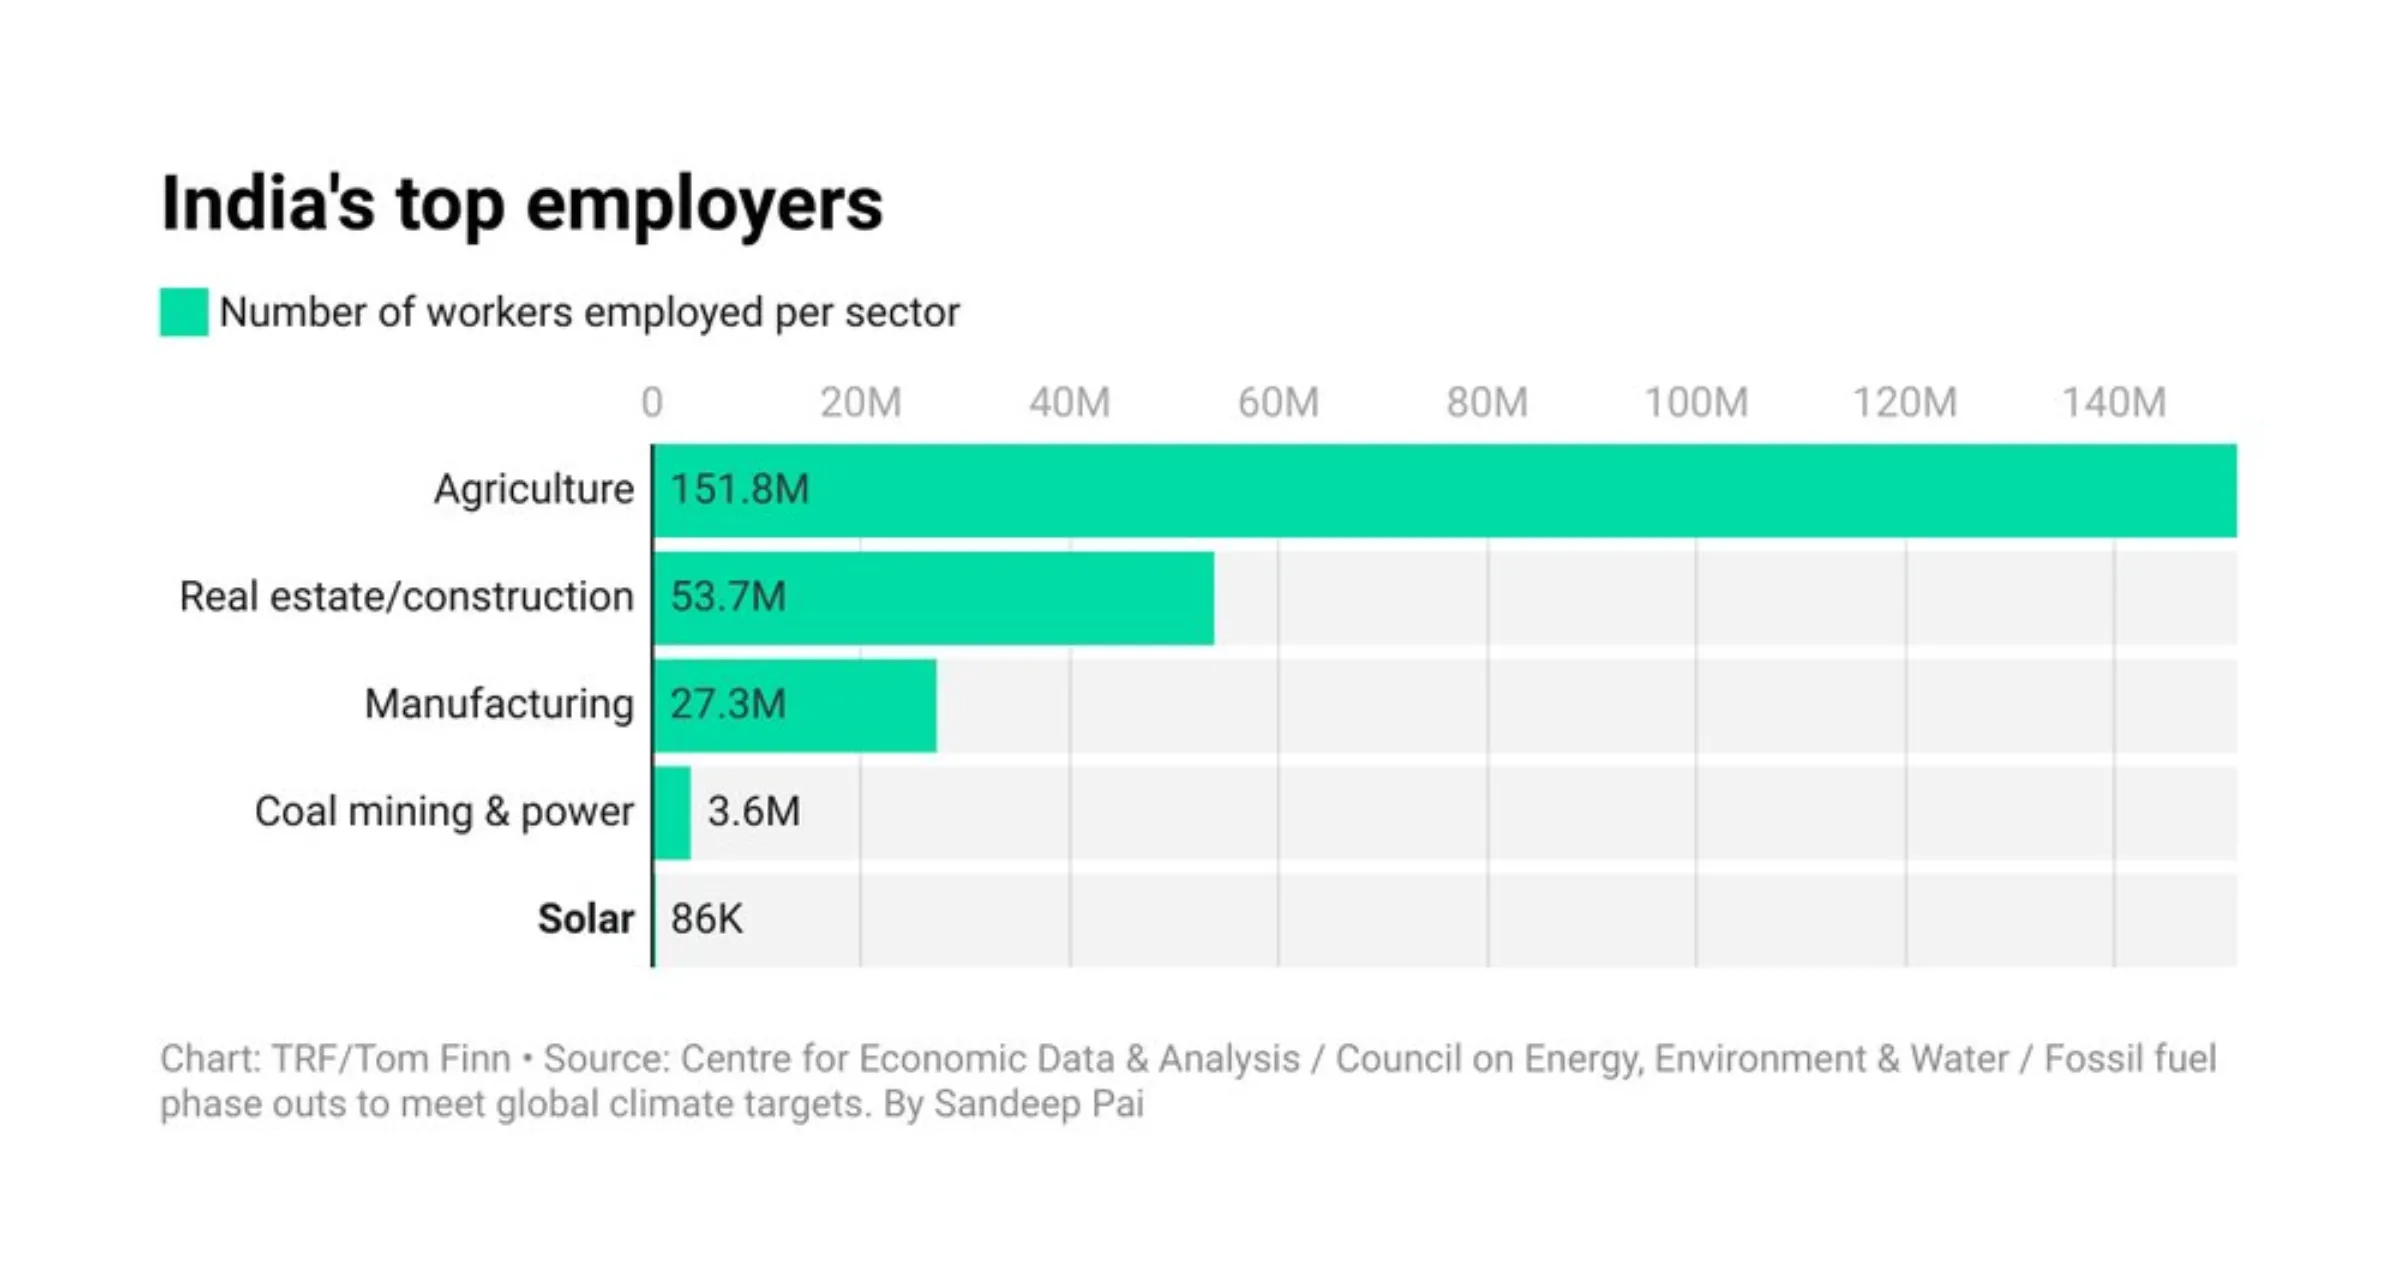 Chart: India's top employers - numbers of workers employed per sector: agriculture, real estate/construction, manufacturing, coal mining & power, solar